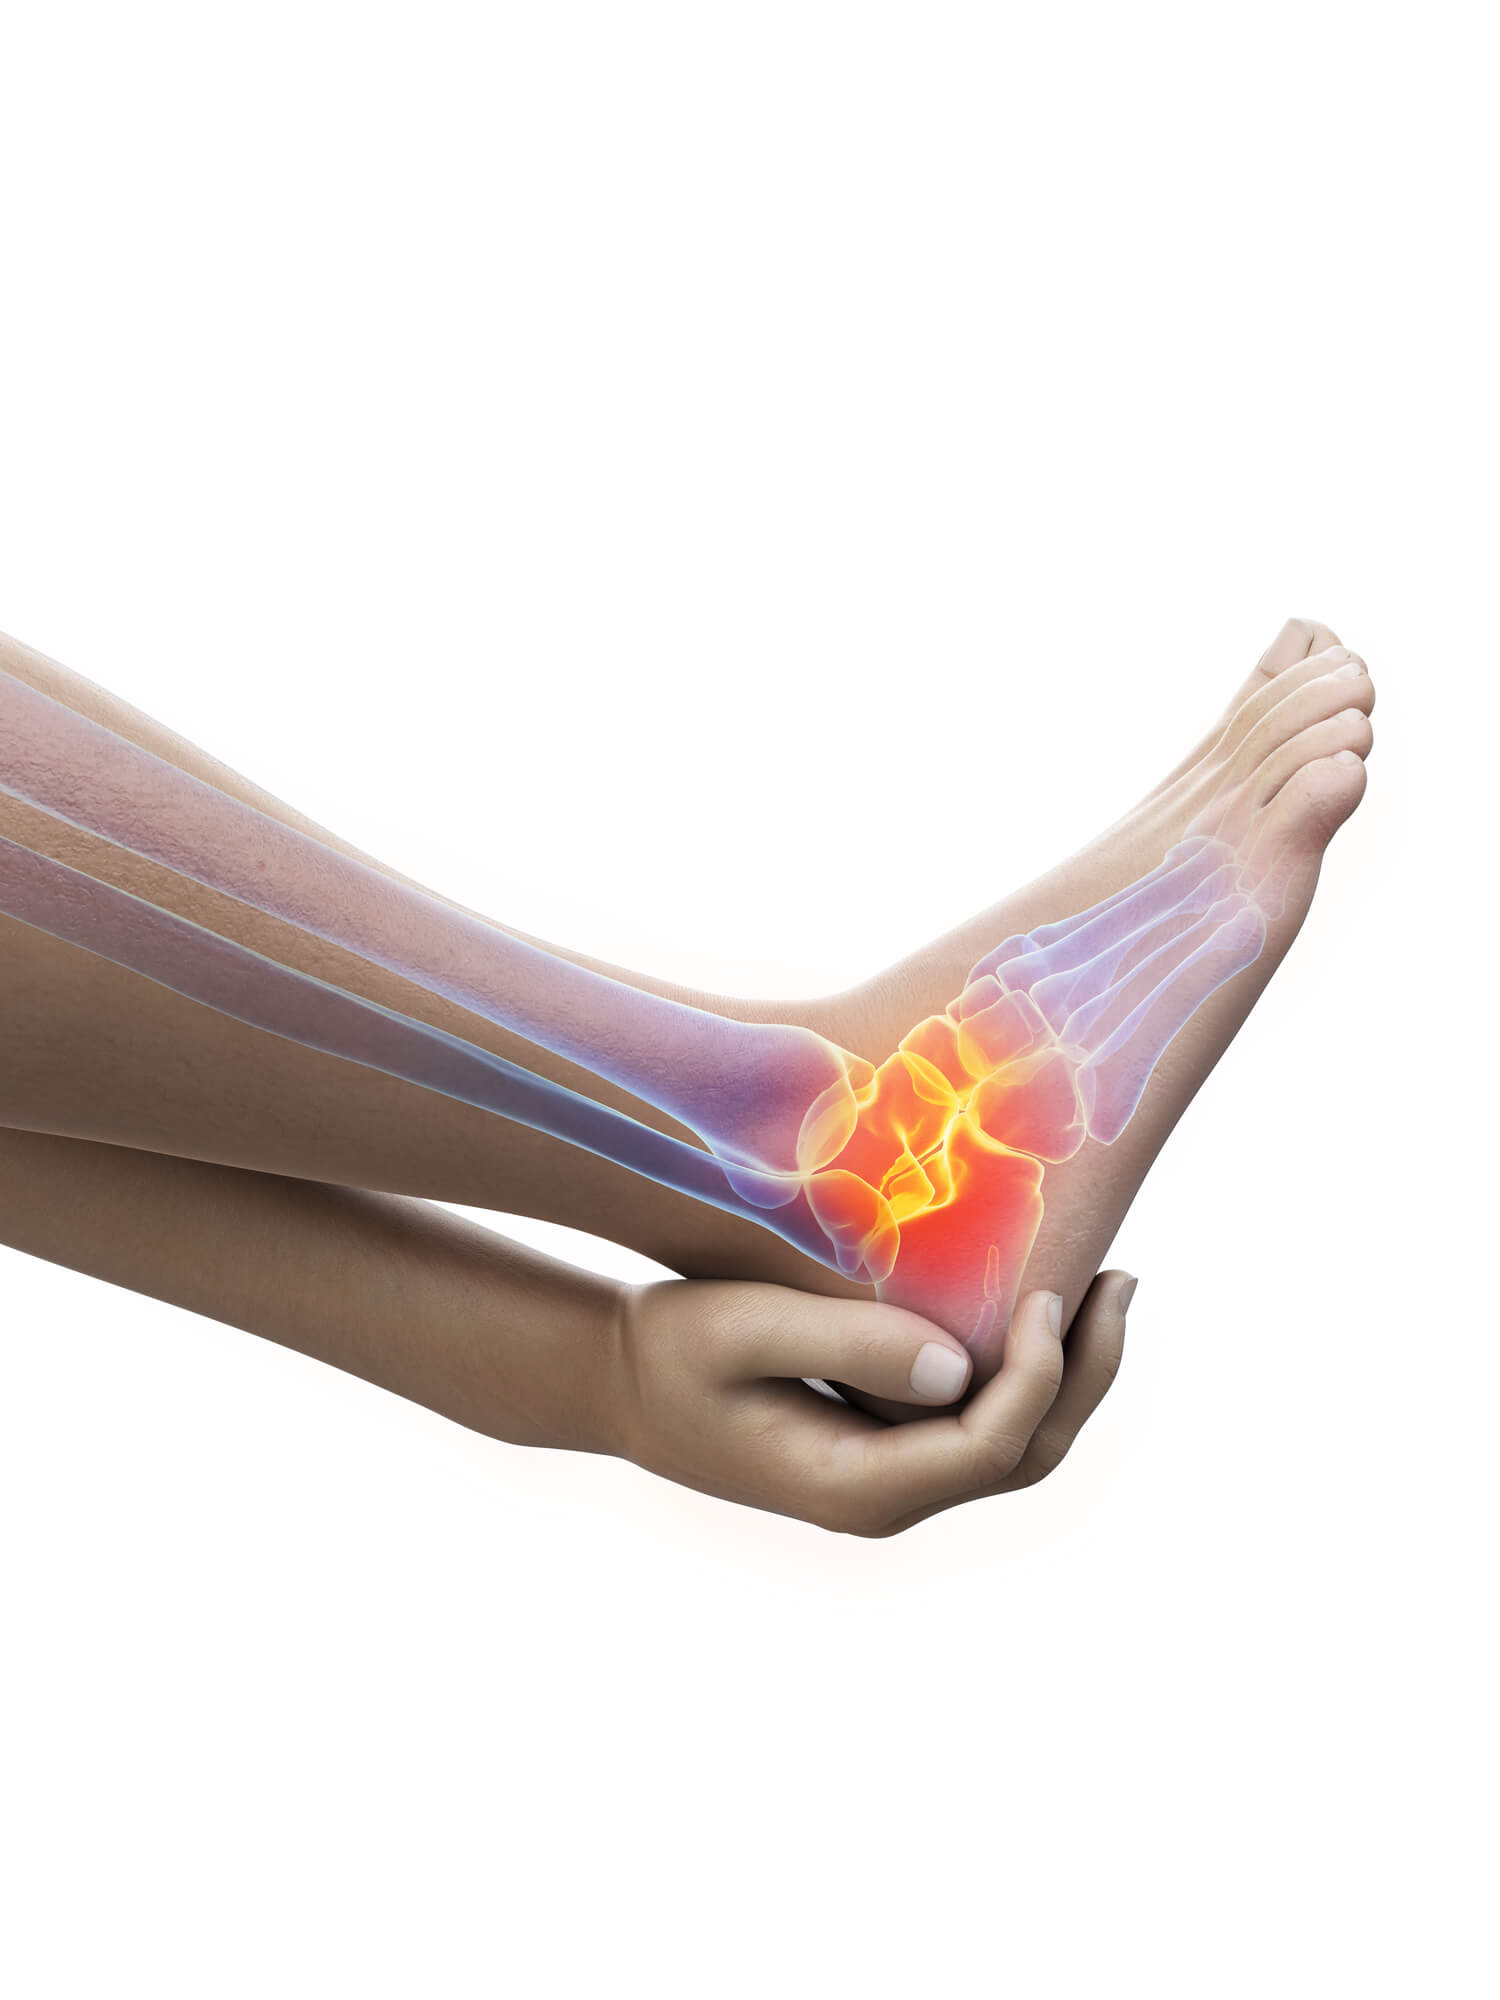 Cankles Treatment Cost in Orange County